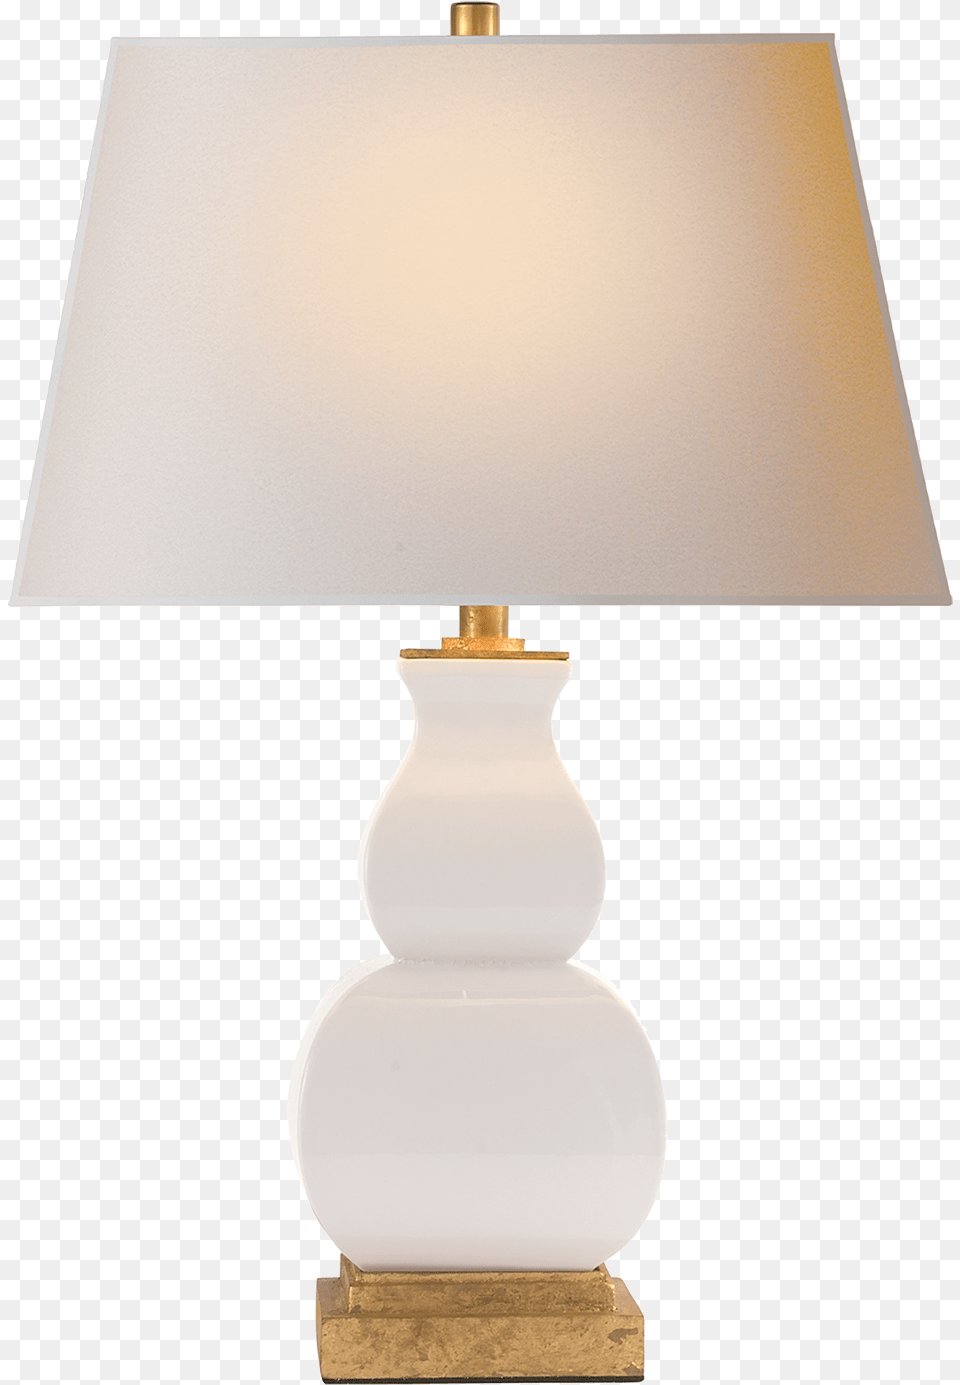 Fang Gourd Table Lamp Ivory Crackle Ceramic Gourd, Table Lamp, Lampshade, Blackboard Free Transparent Png